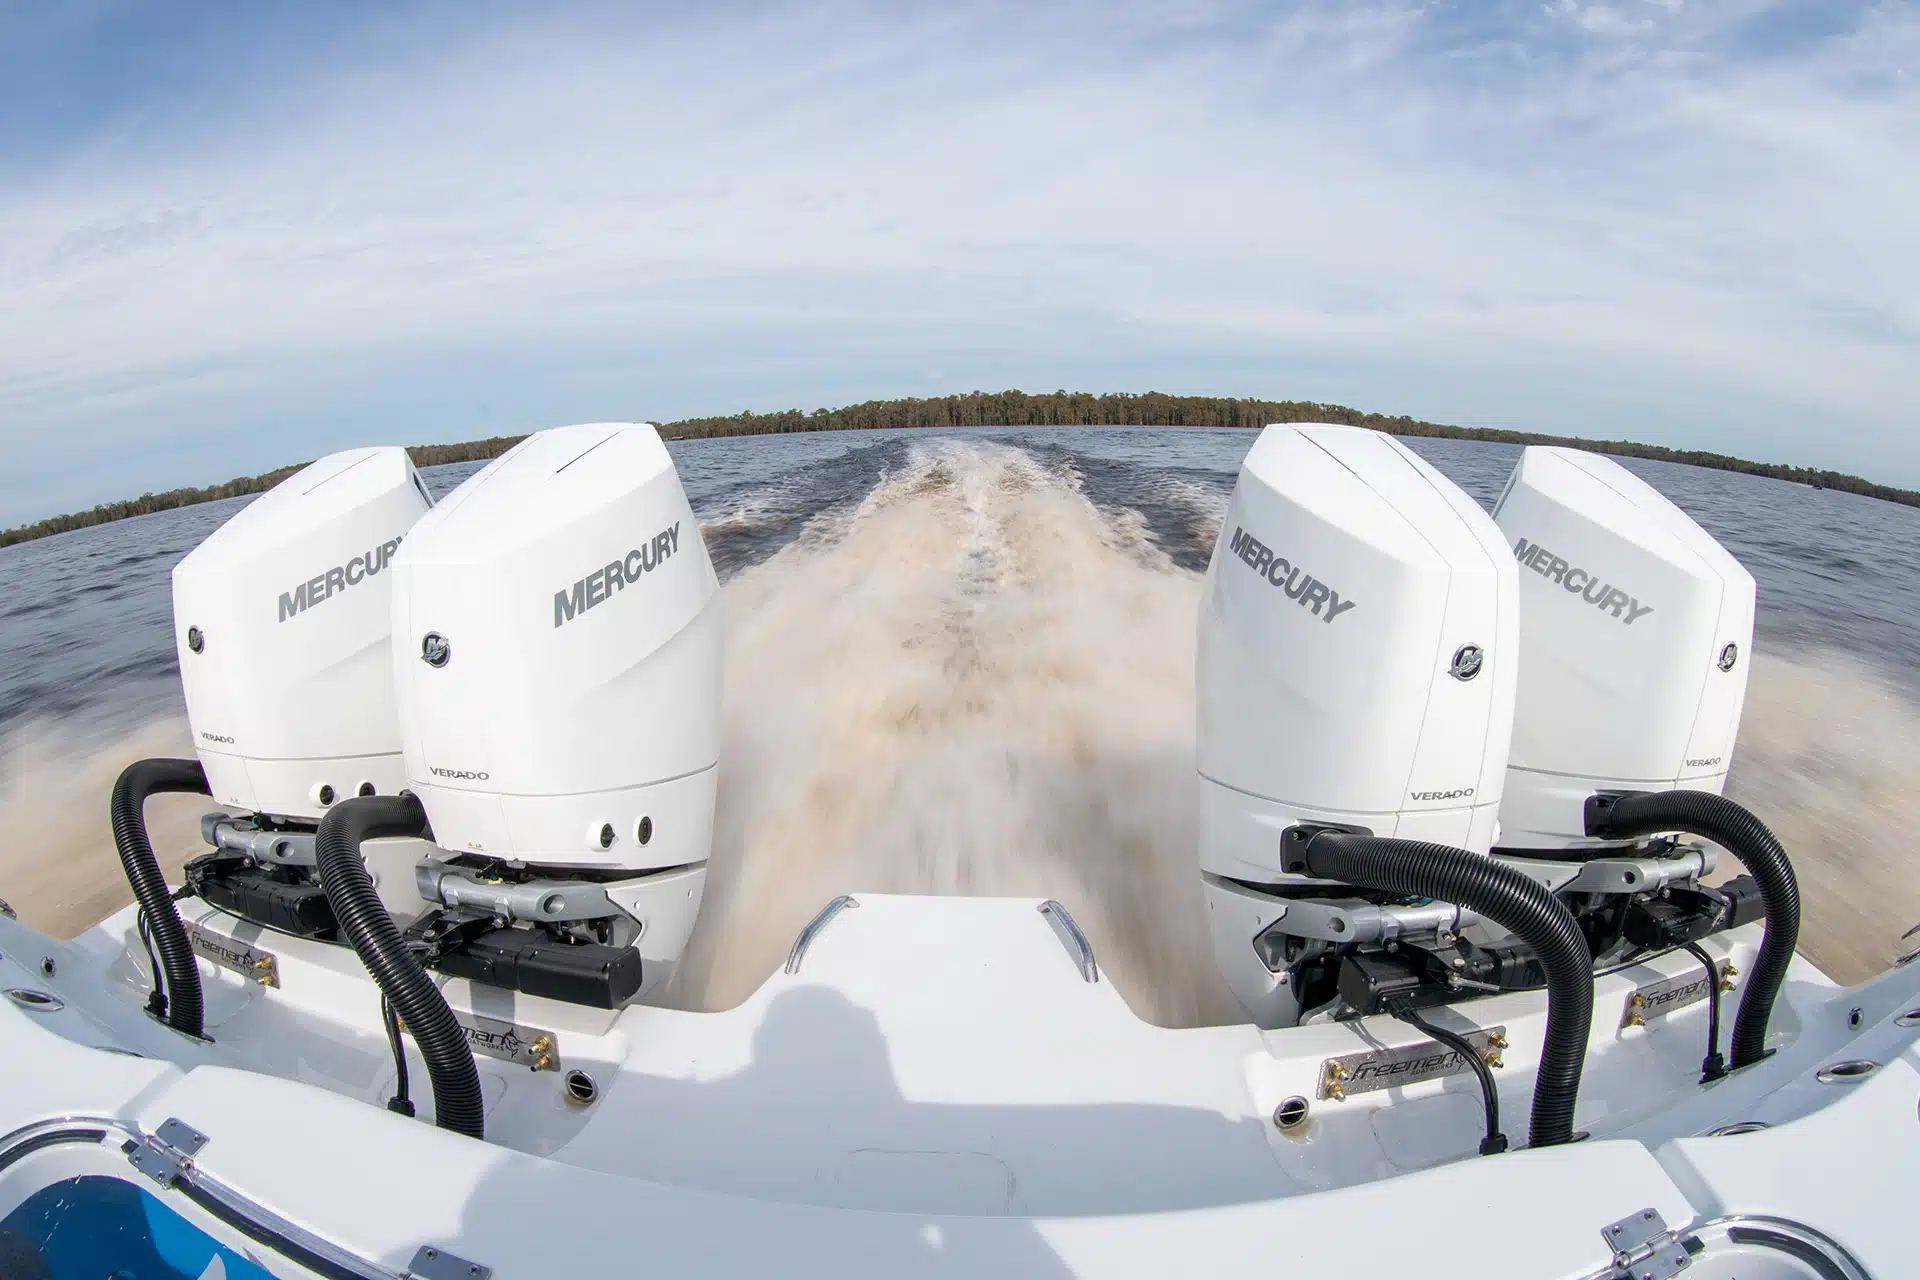 On board with outboards